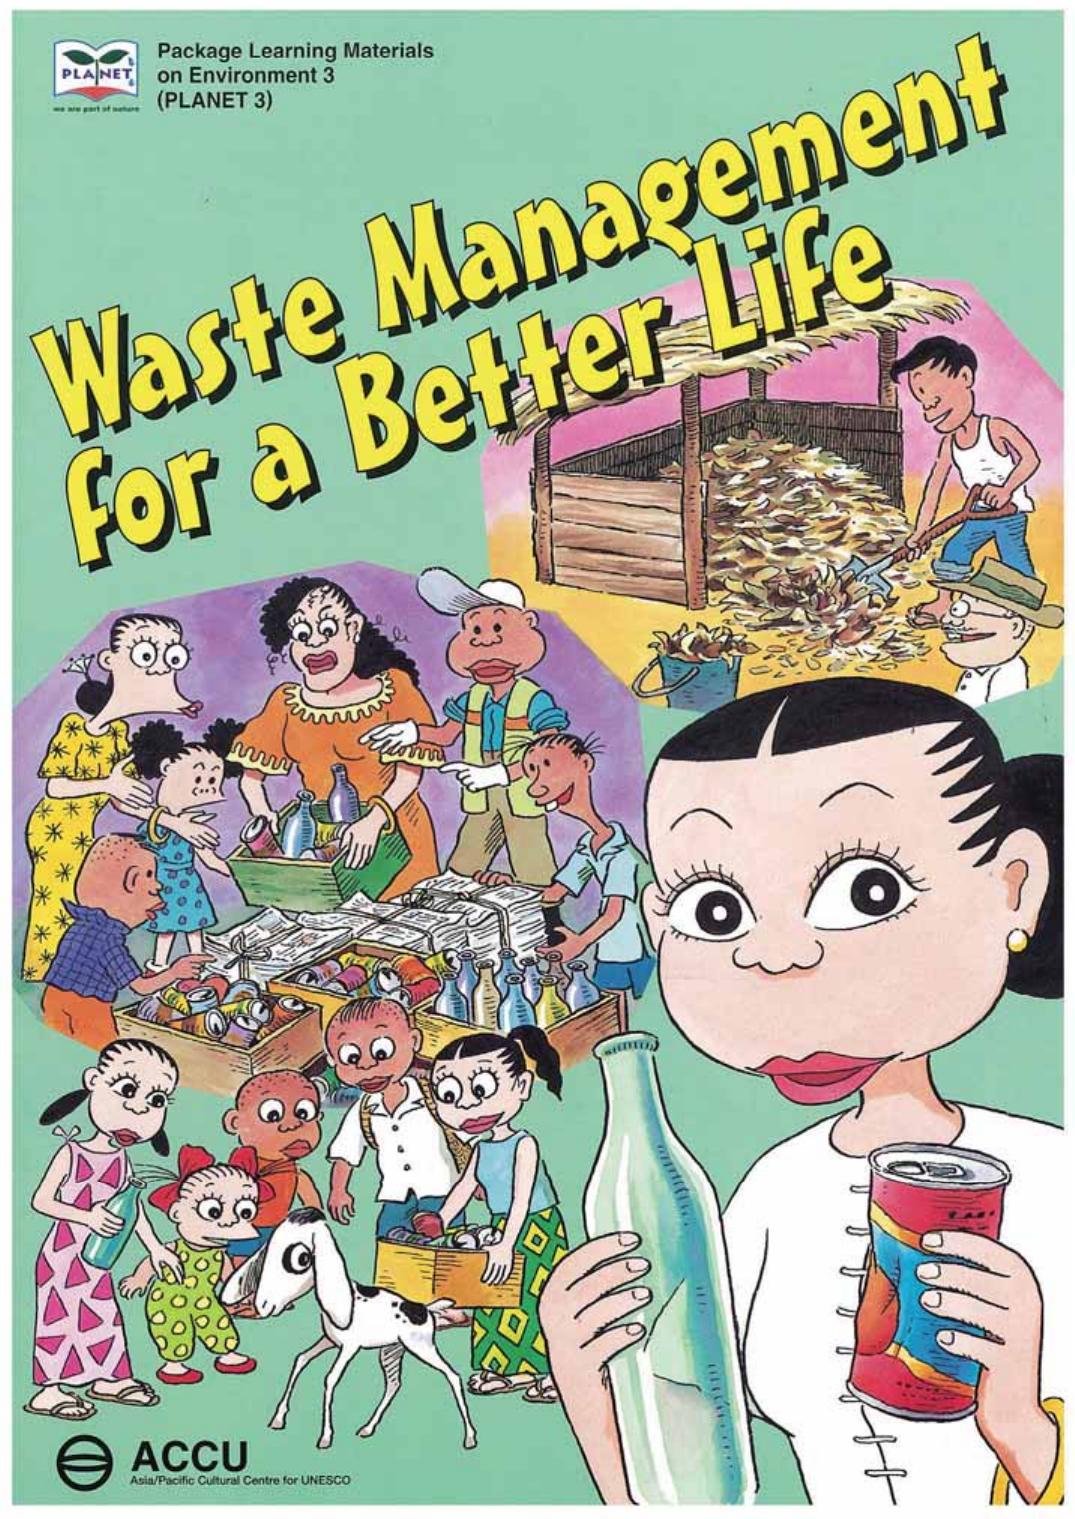 Waste Mangement for a Better Life